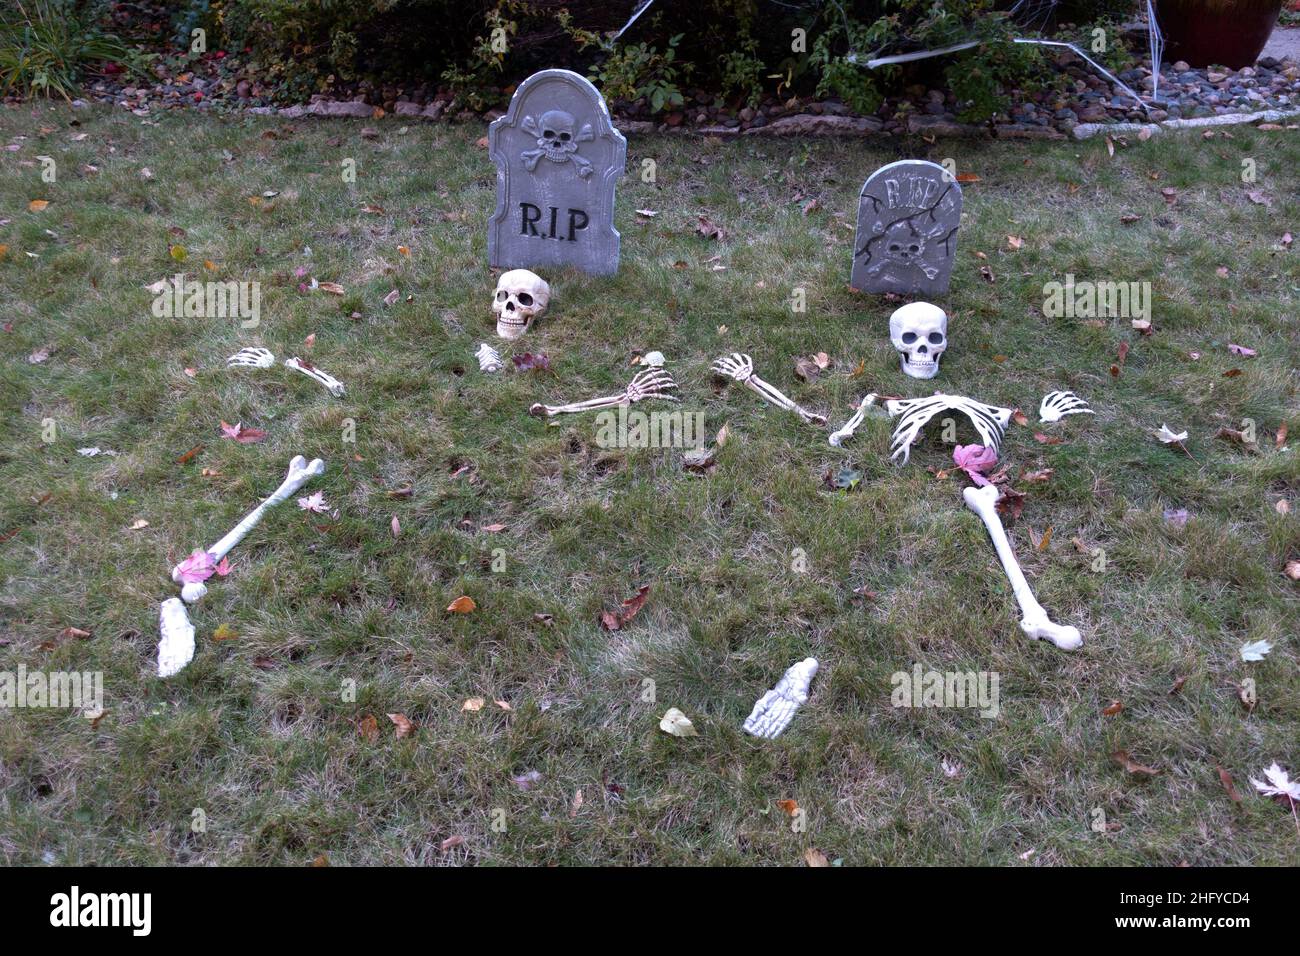 Dismantled skeletons rising from their graves near their tombstones, don't forget that these are Halloween decorations. St Paul Minnesota MN USA Stock Photo